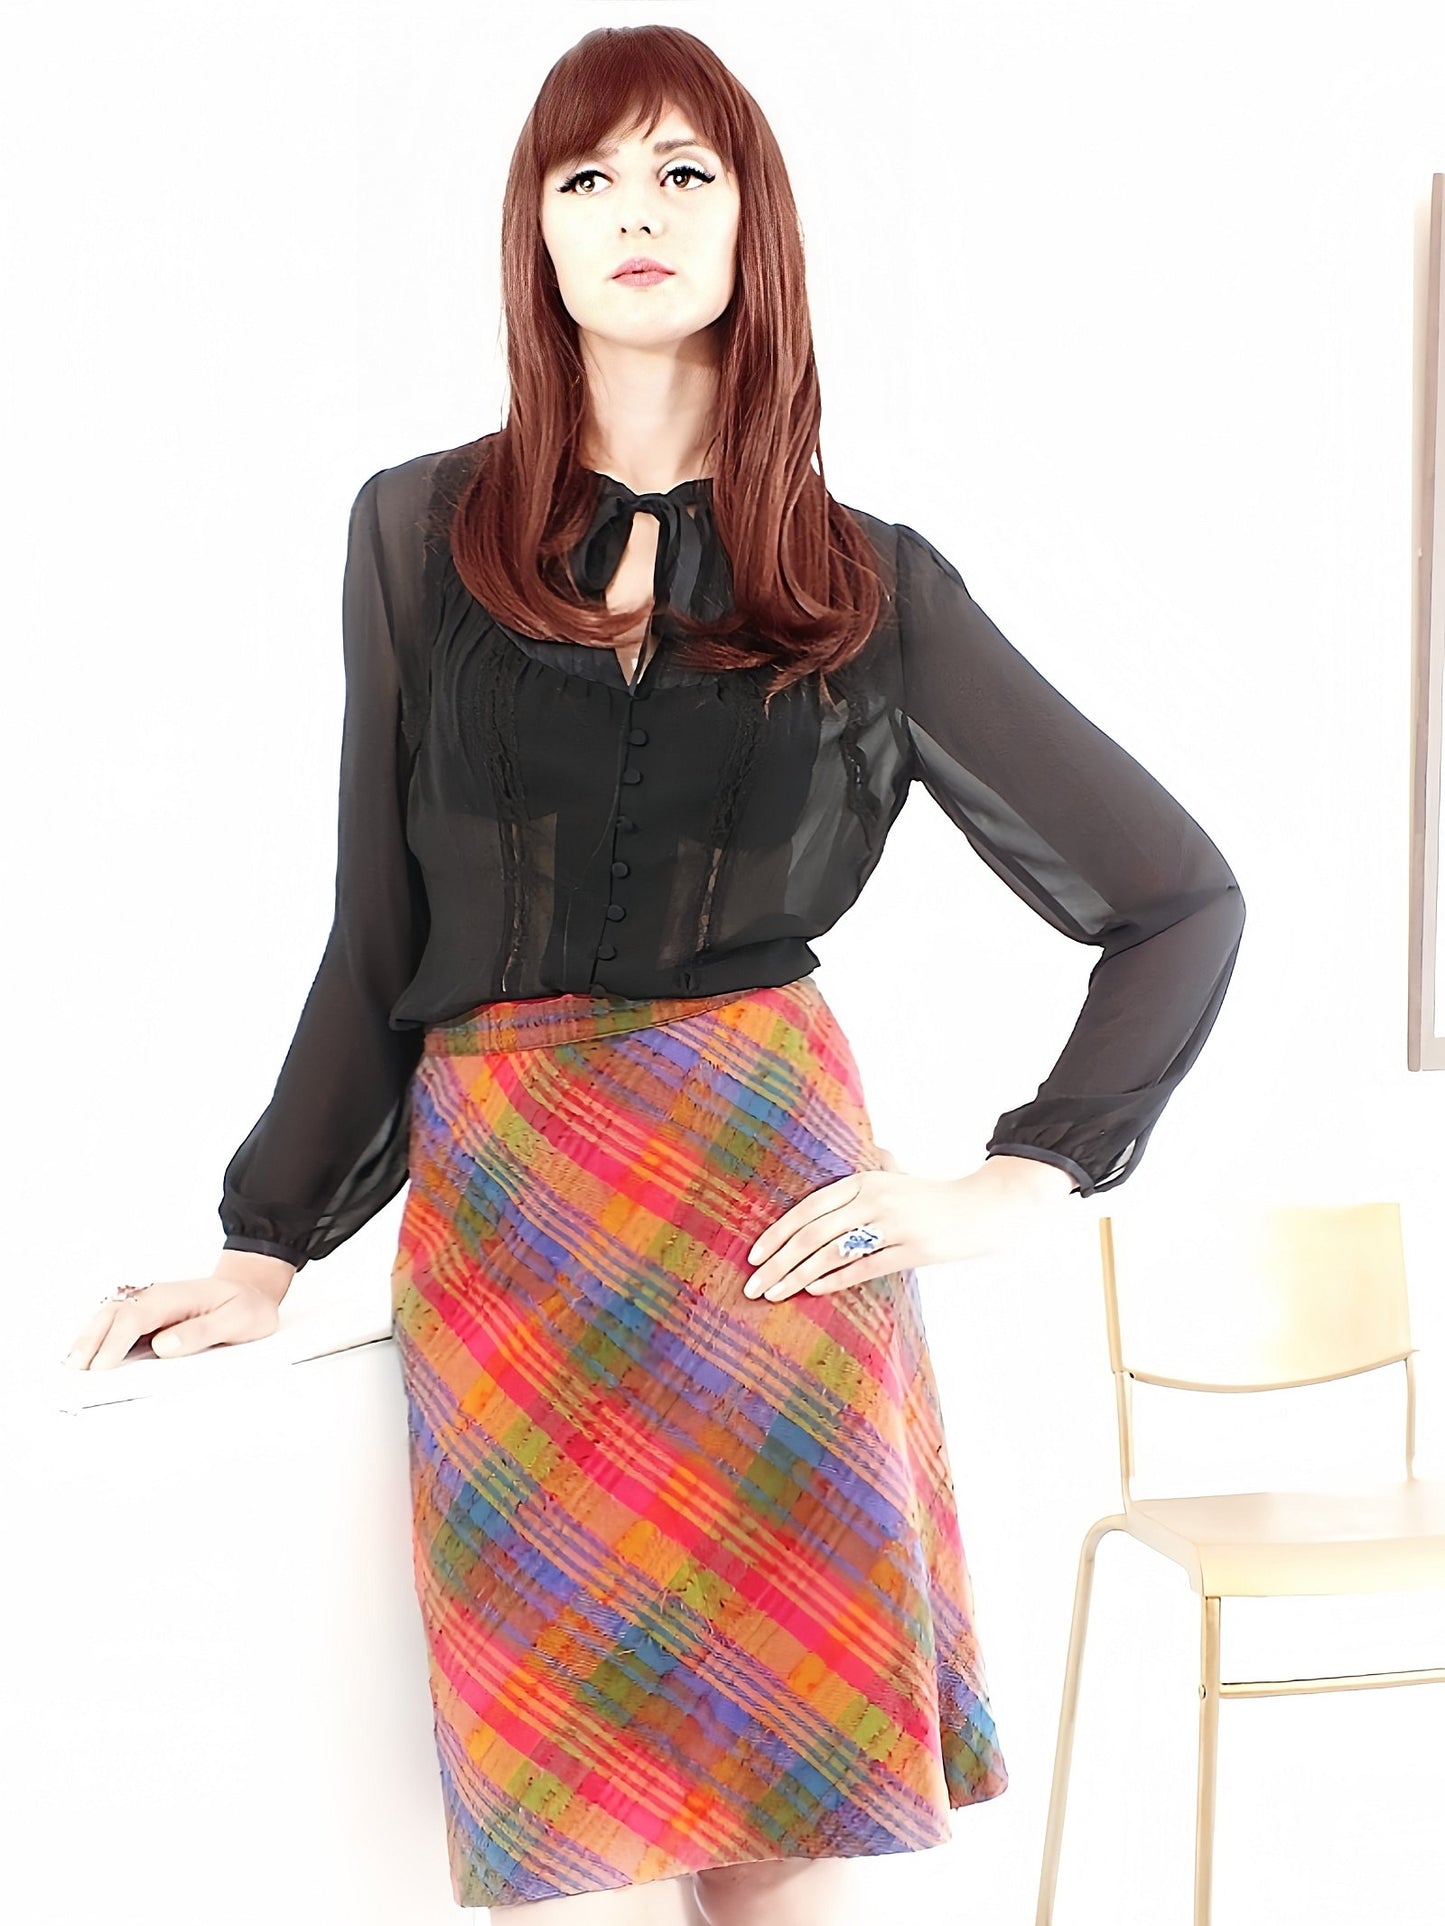 Vintage 90s Mulberry Plaid Wool Skirt Multi Coloured - Size 12/14